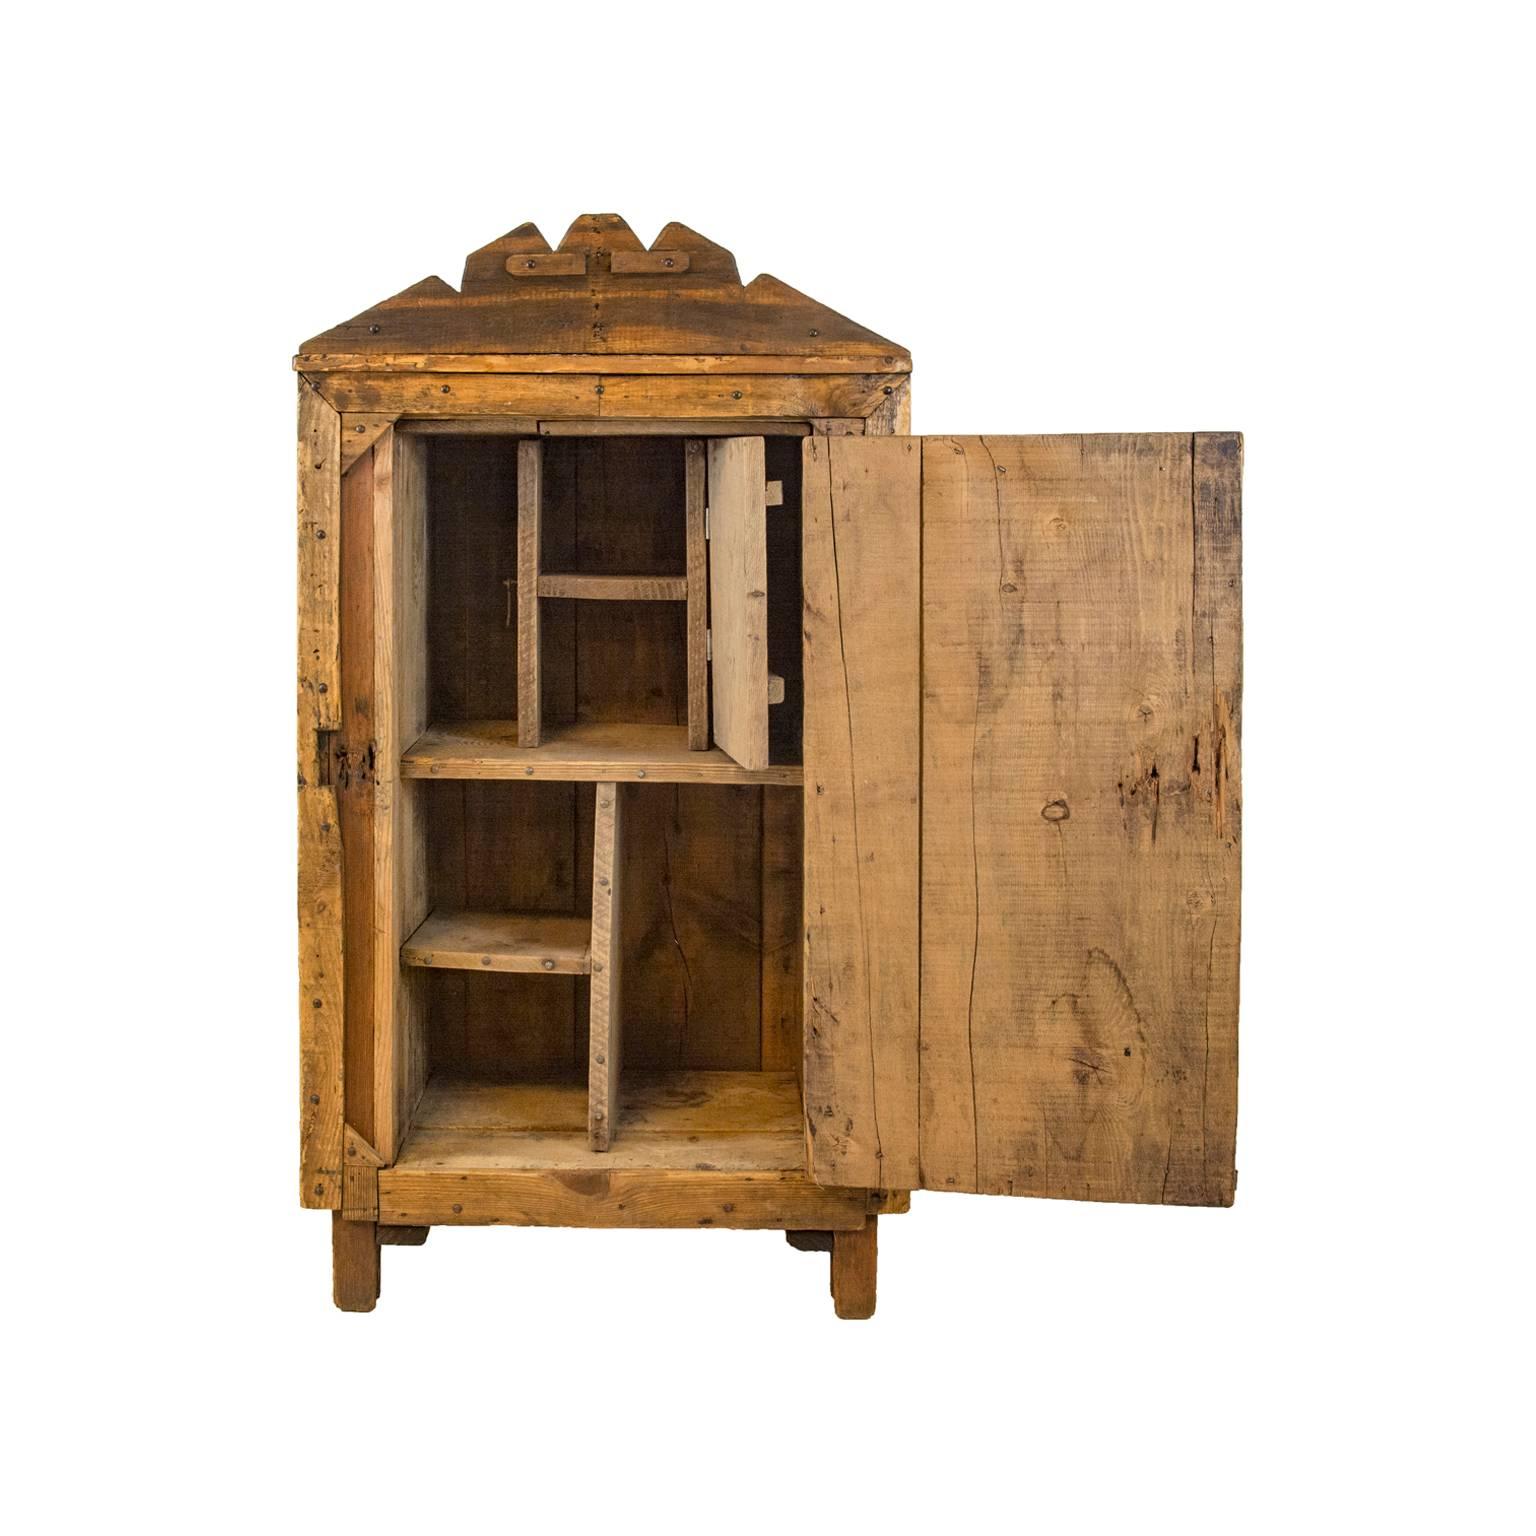 Antique Folk Art wood letter chest with hinged front door, divided top and bottom compartments. Small hinged door in centre of second shelf compartment.

Dimensions: 22.5 D x 14.5 W, 37 H at the top of the chest, and extends to 42 H via an